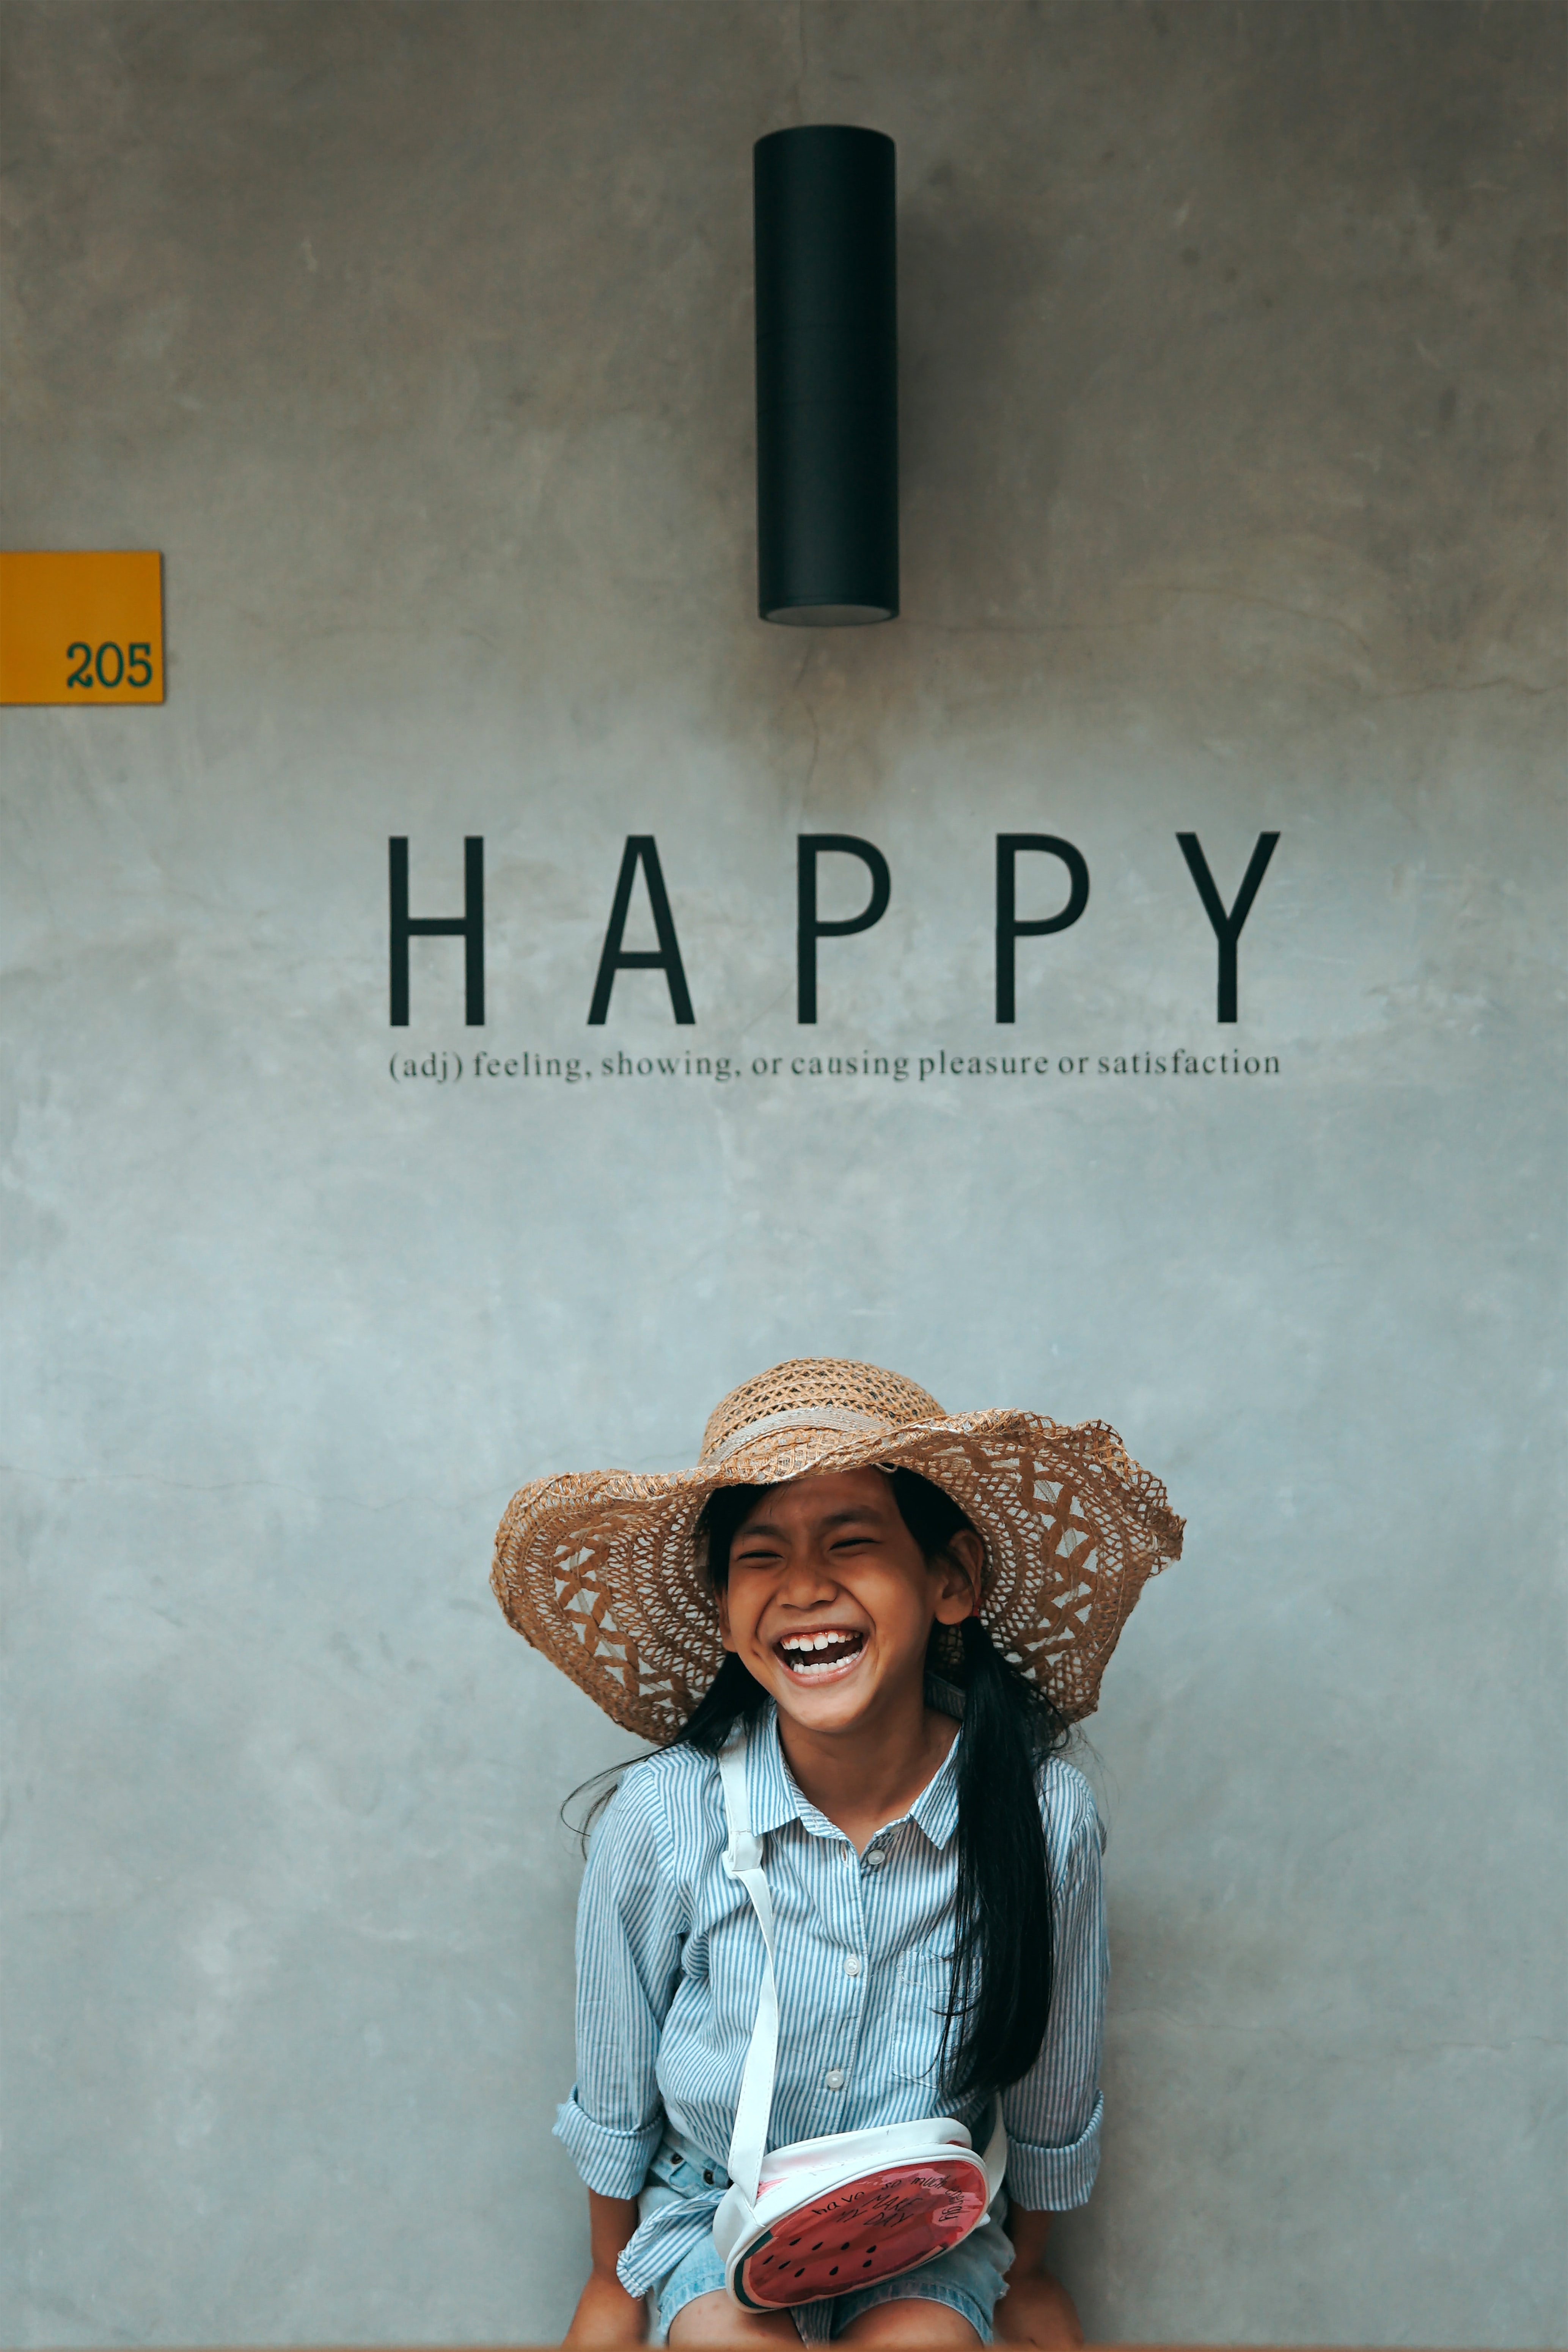 young girl smiling with the text happy and definition